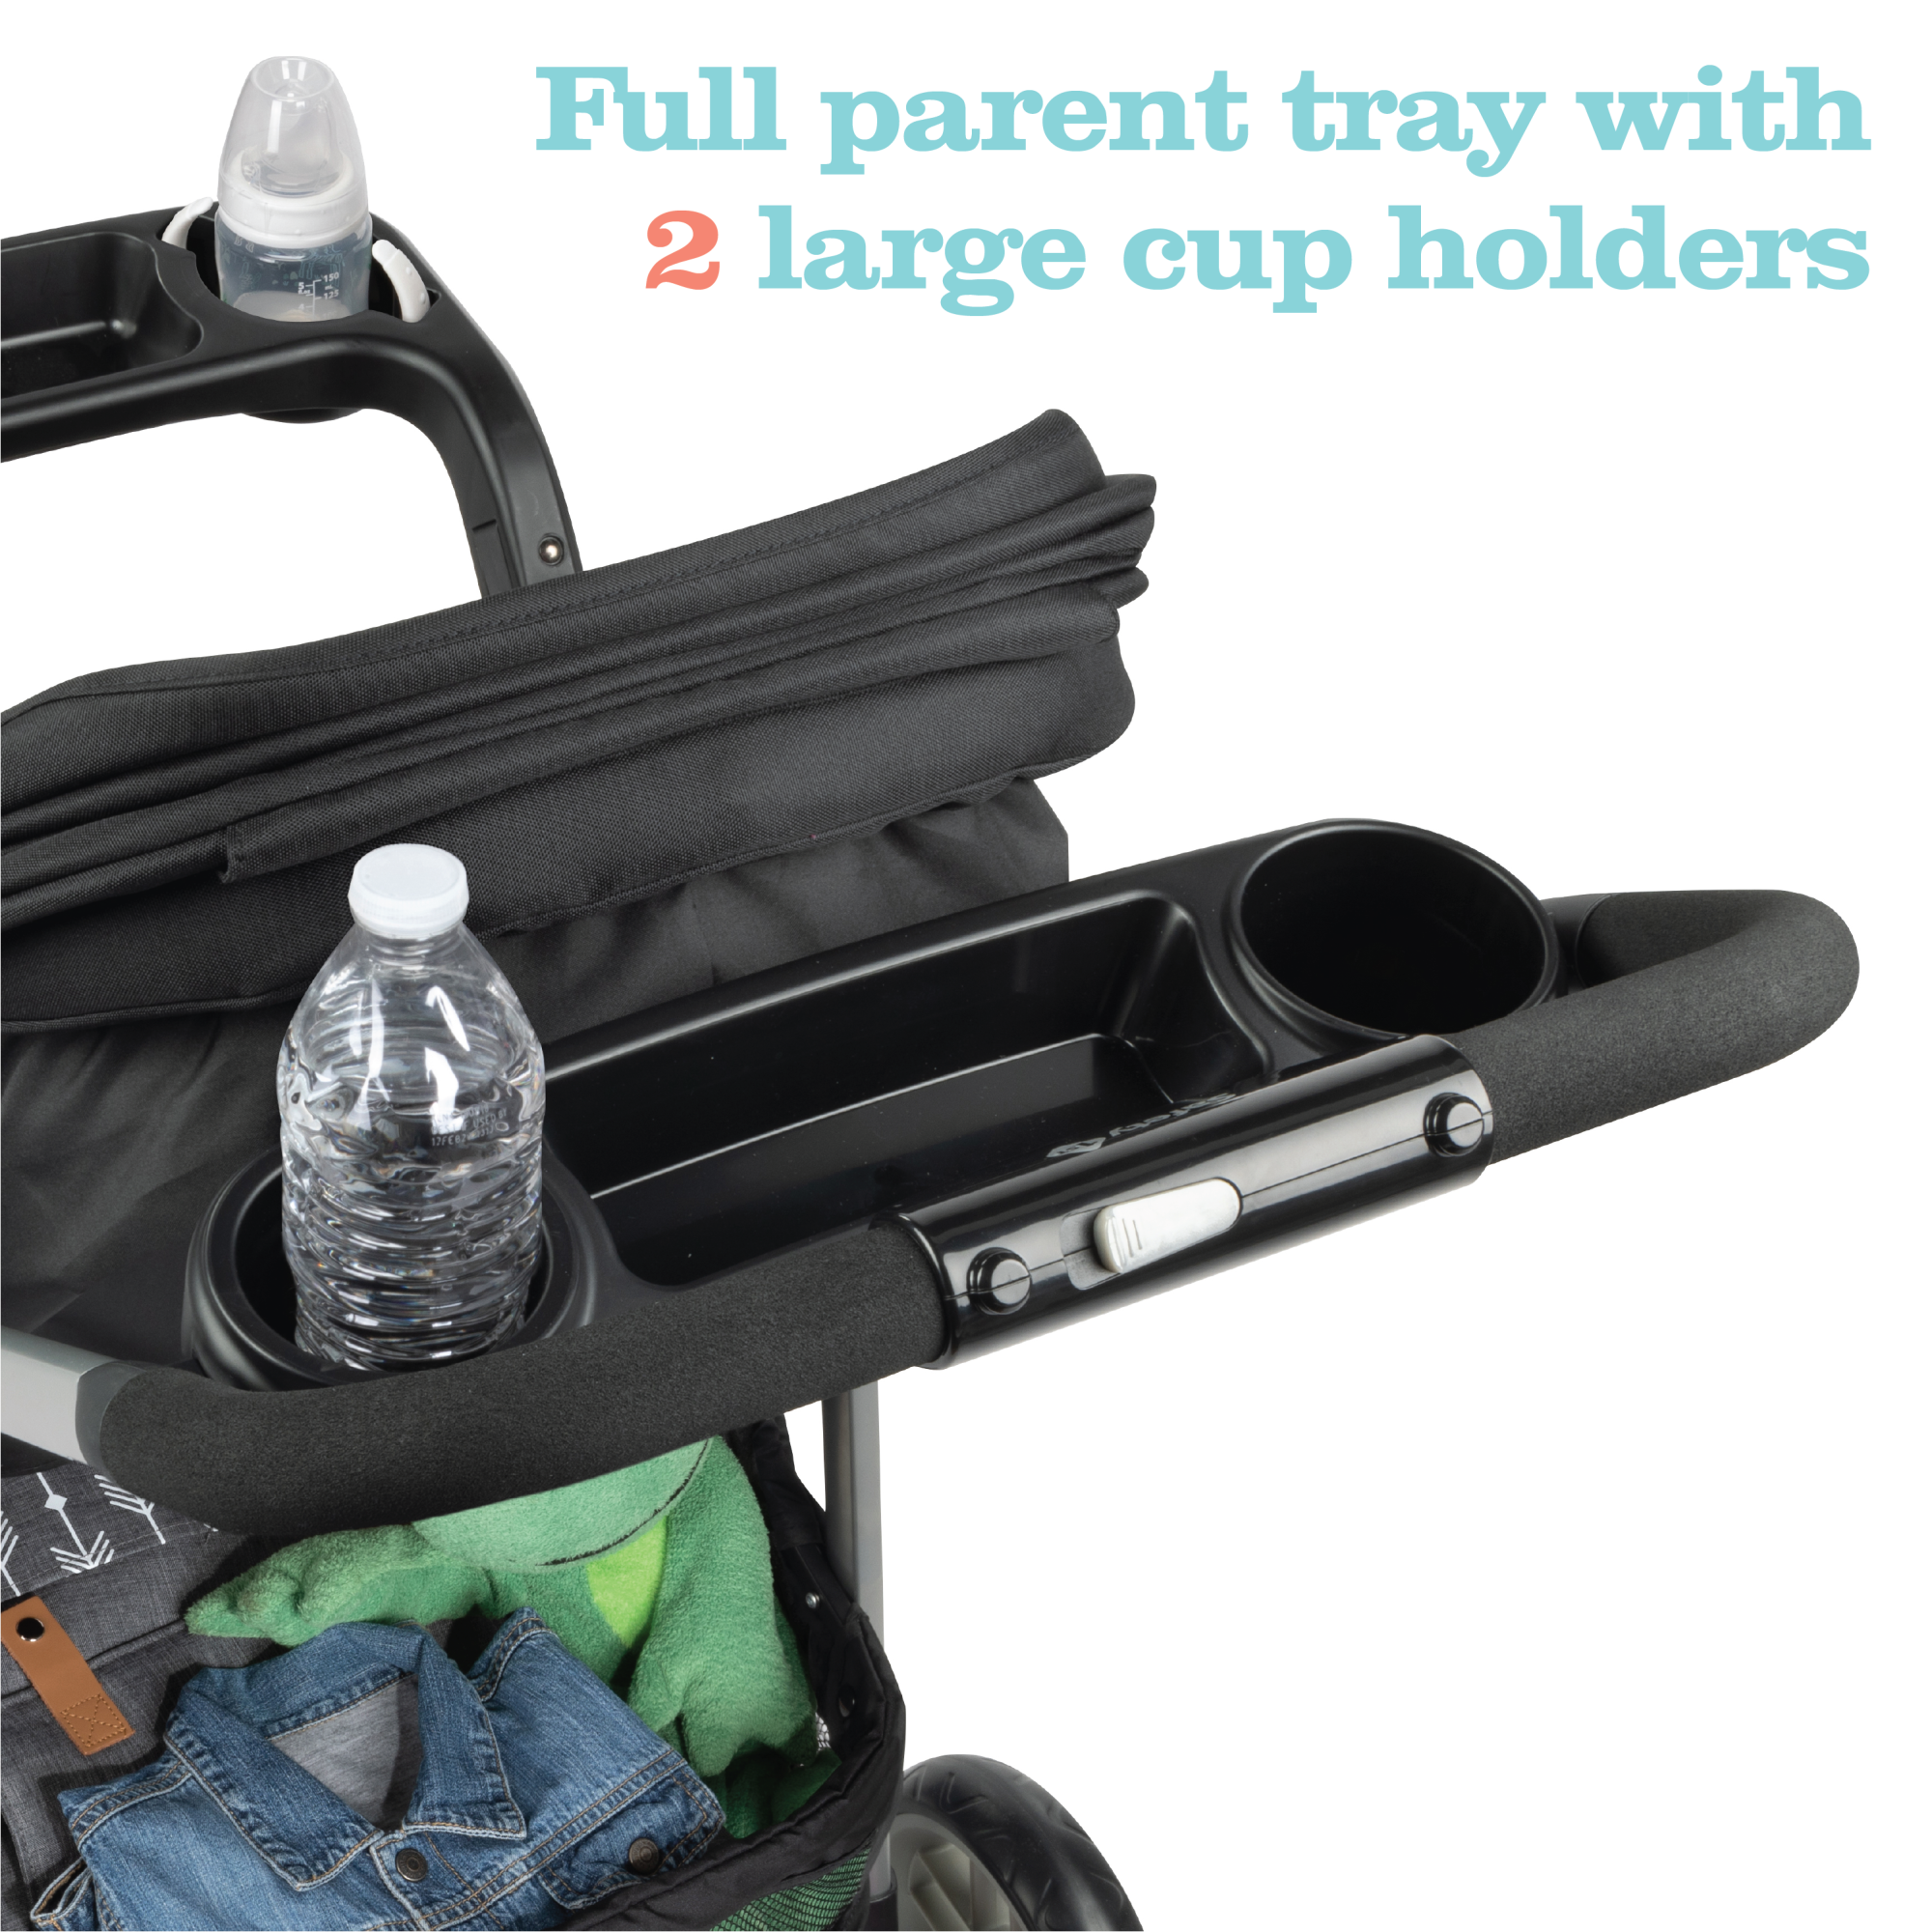 Disney Baby Grow and Go™ Modular Travel System - full parent tray with 2 large cup holders